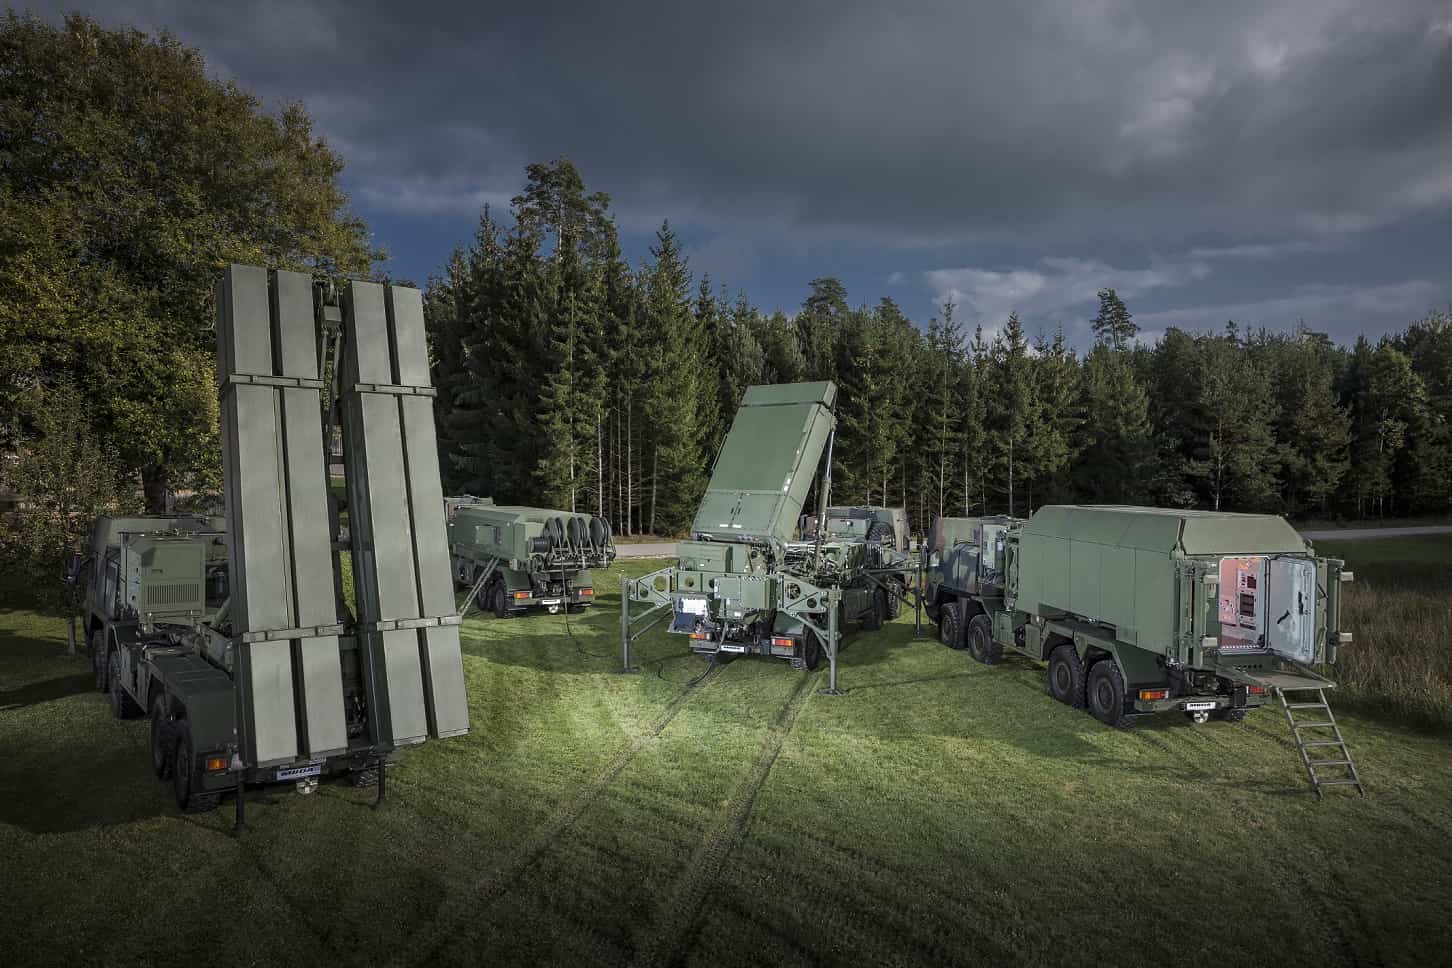 MBDA and Lockheed Martin have submitted a proposal for Germany's next generation integrated air and missile defense system, building on their legacy of partnership to create jobs, share technical expertise and deliver effective capabilities.